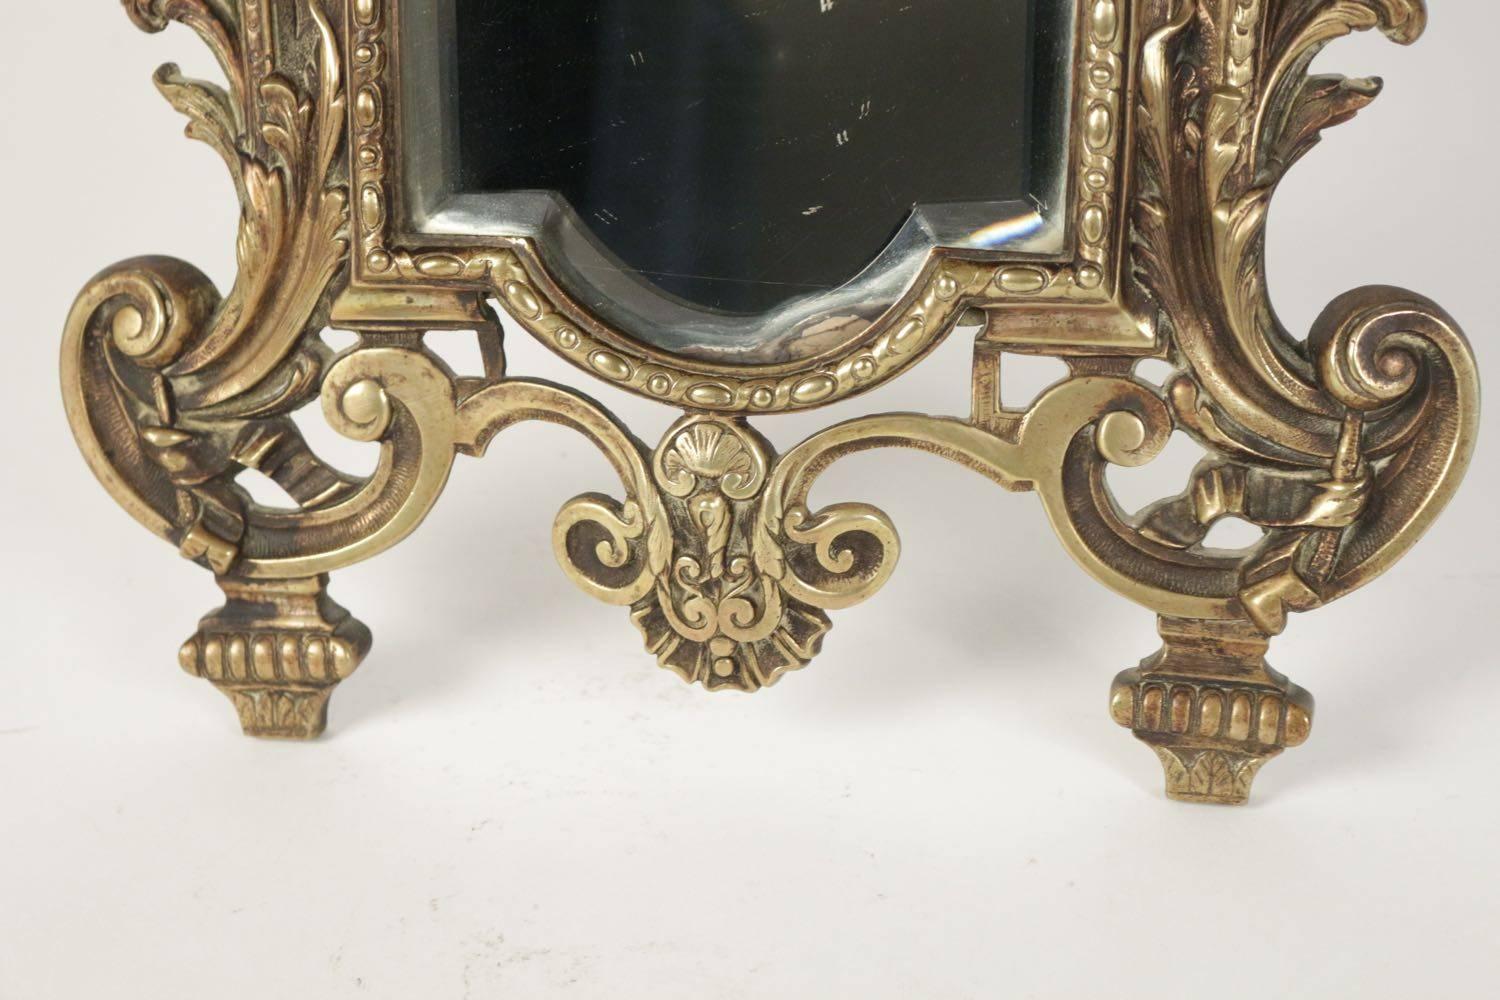 Napoleon III Important Vanity Mirror in Bronze Patine from the 19th Century For Sale